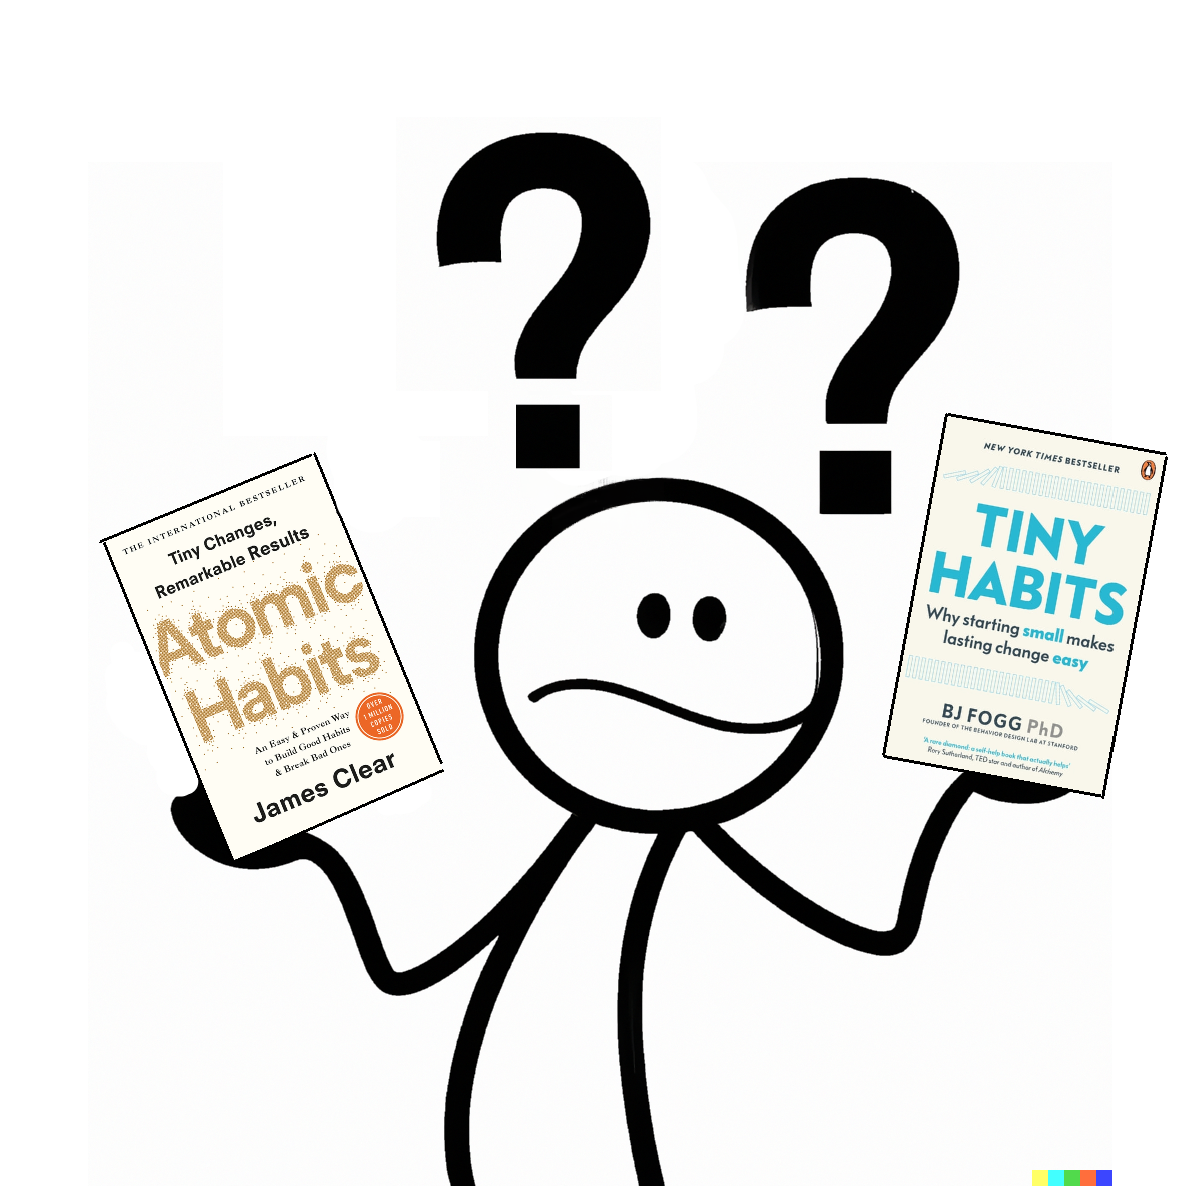 Atomic Habits: The Power of Small Habits to Change Your Life